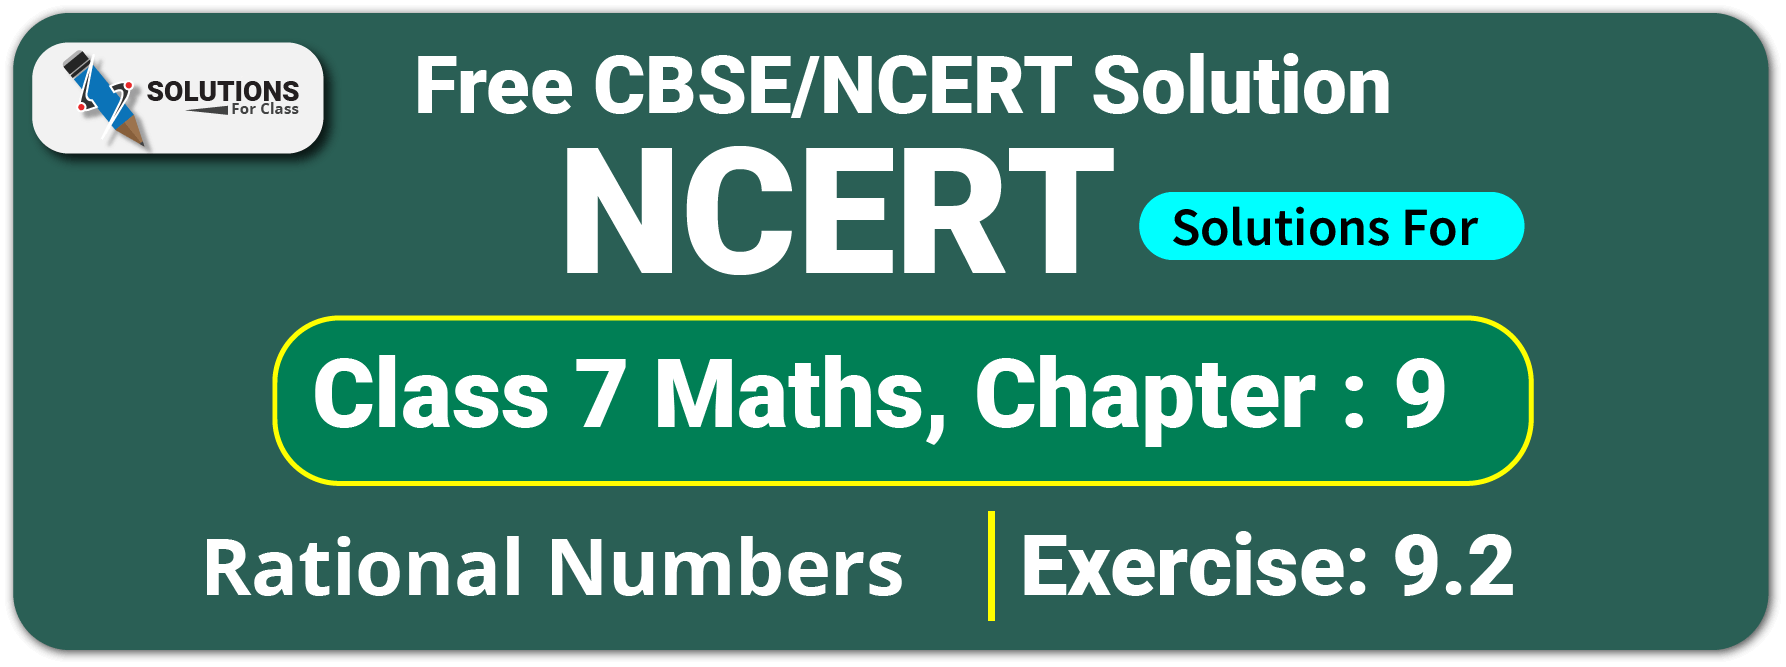 NCERT Solutions For Class 7 Maths Chapter 9, Rational Numbers, Exercise 9.2